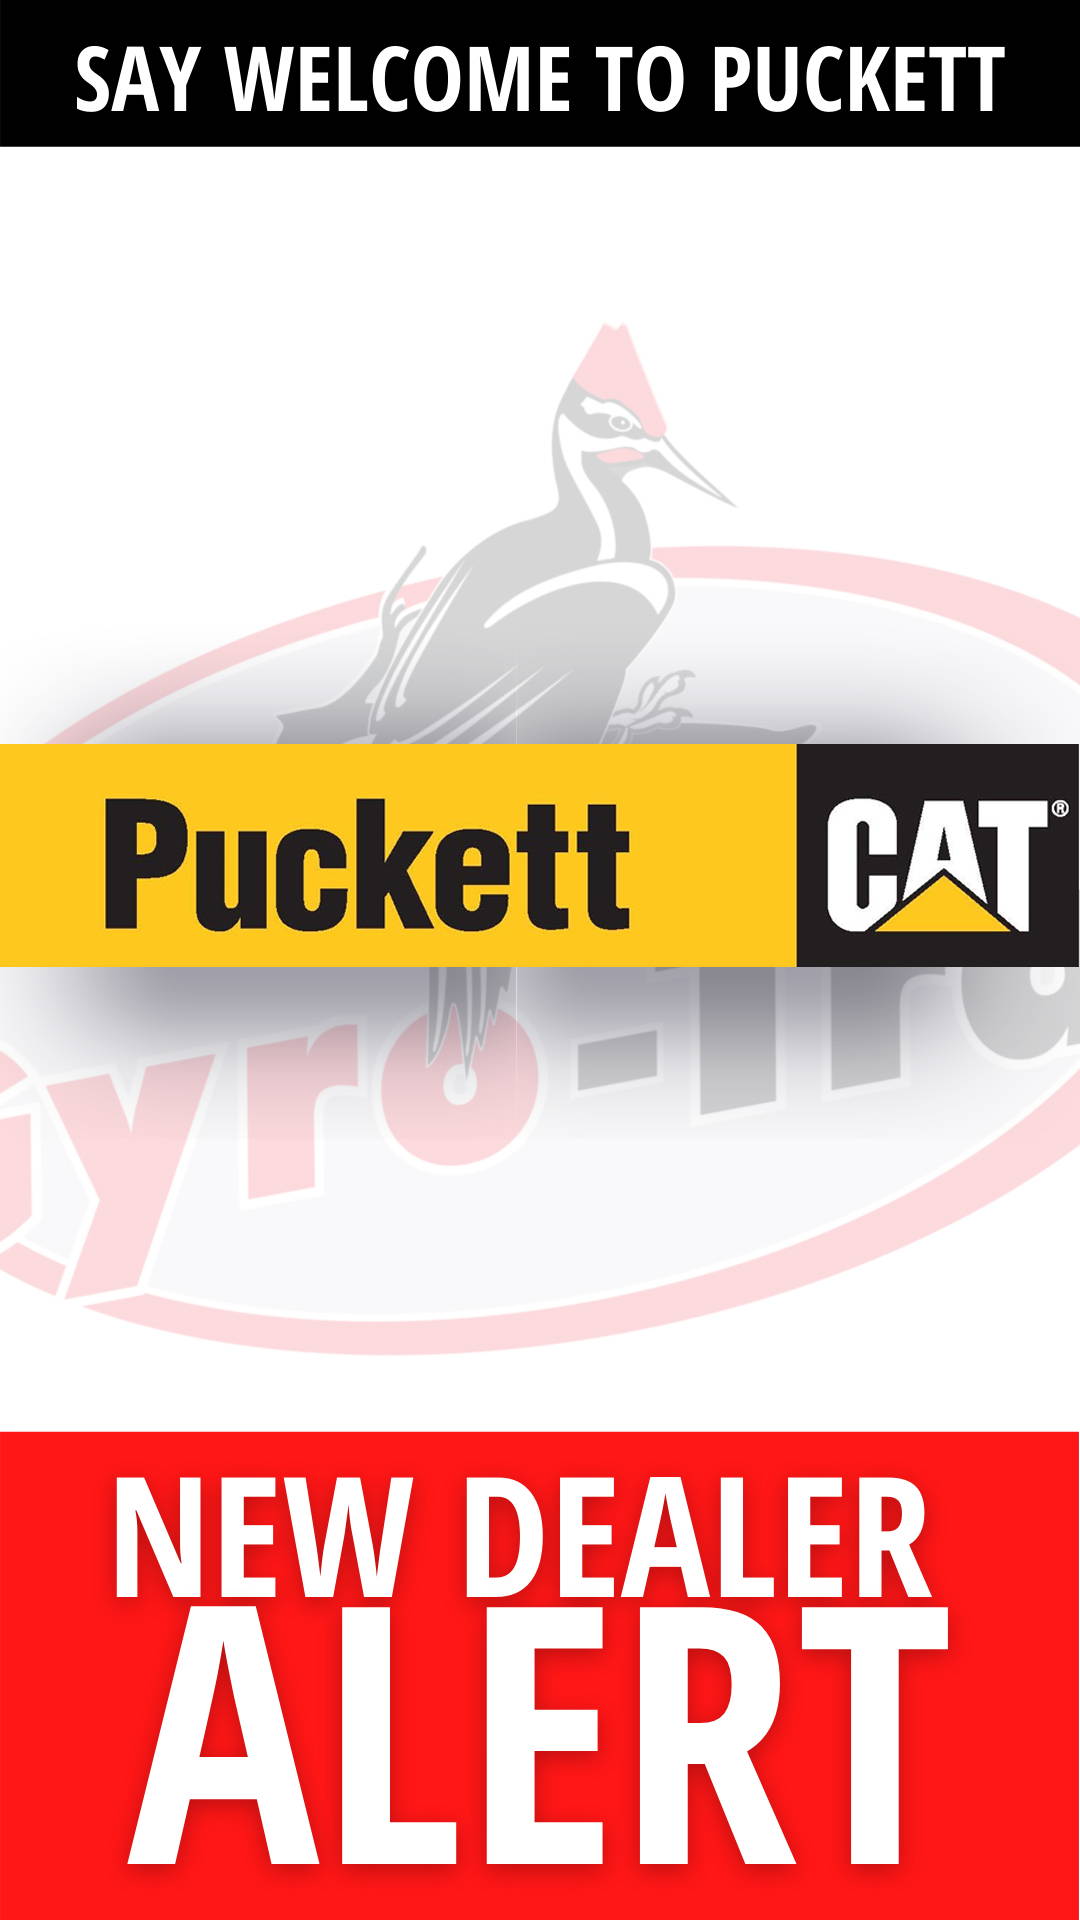 Gyro-Trac Partner dealership in Pucket Rents